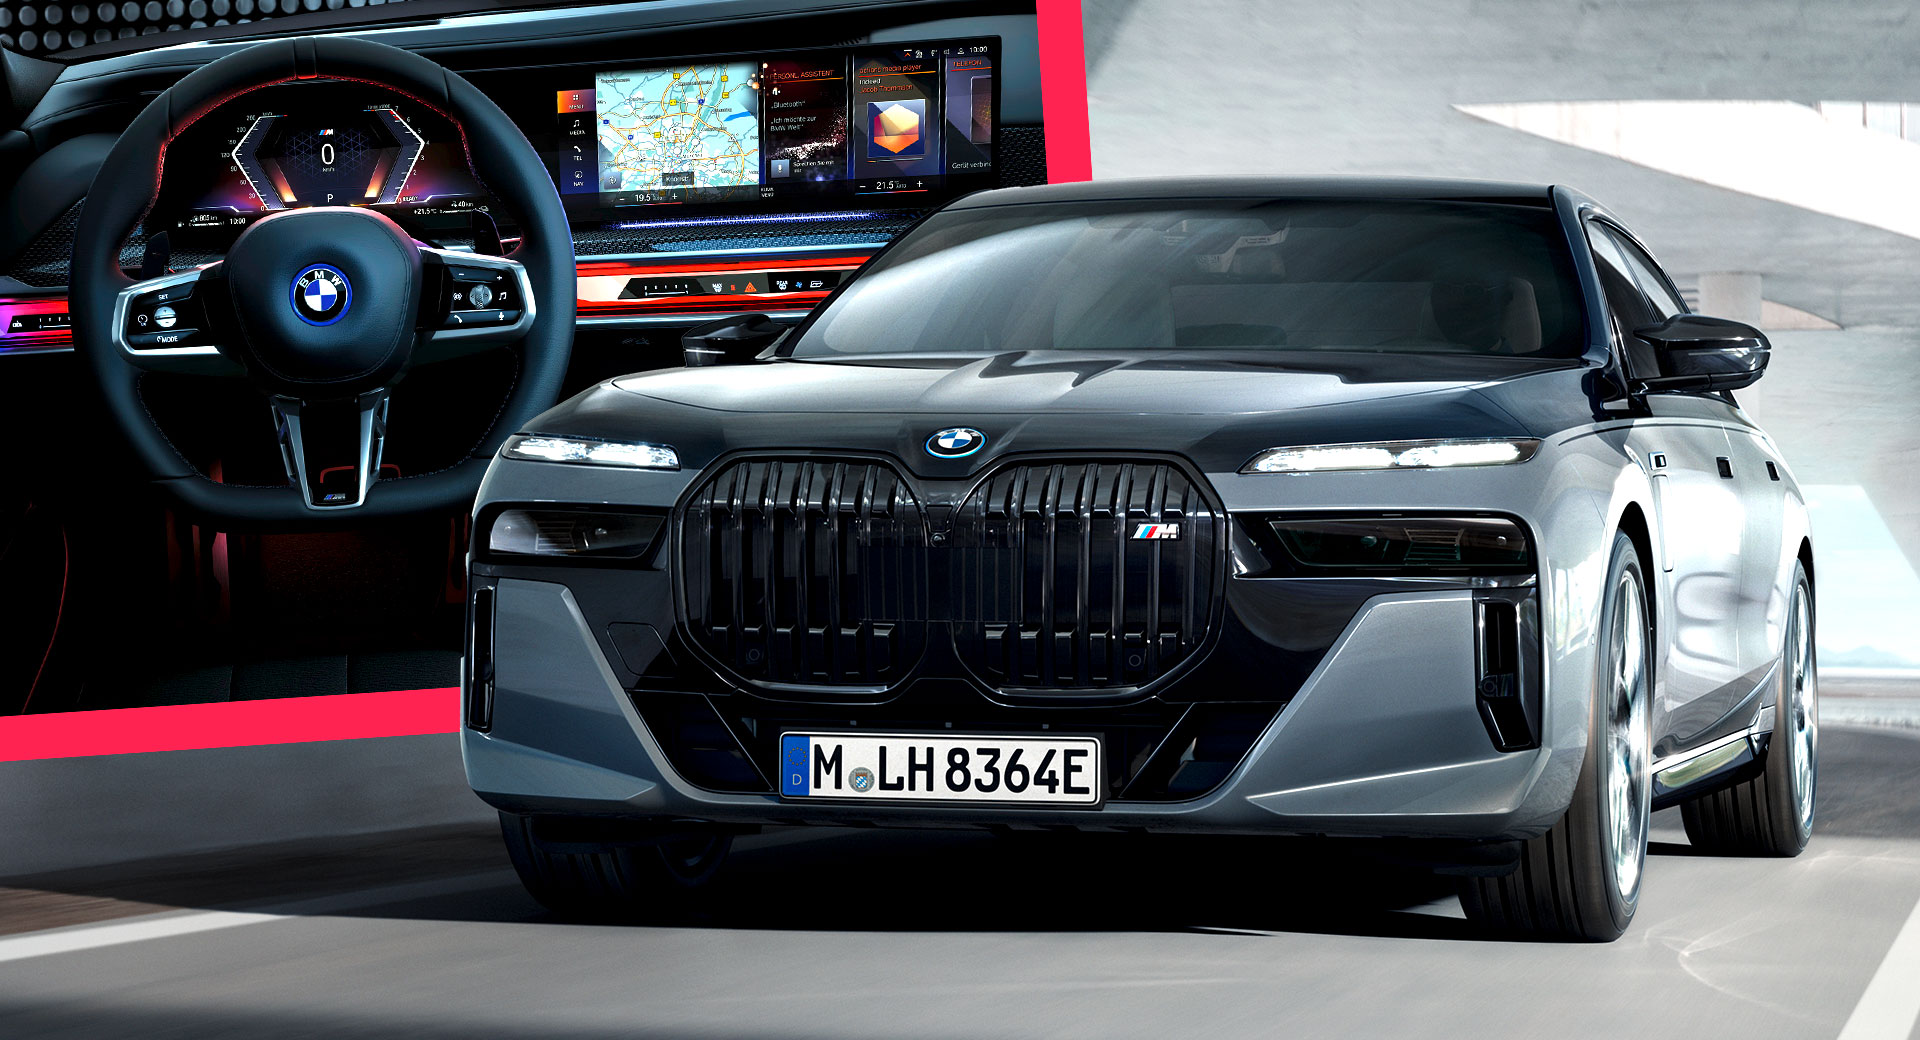 The BMW i7 is here with 536 hp and an abnormally large front grille